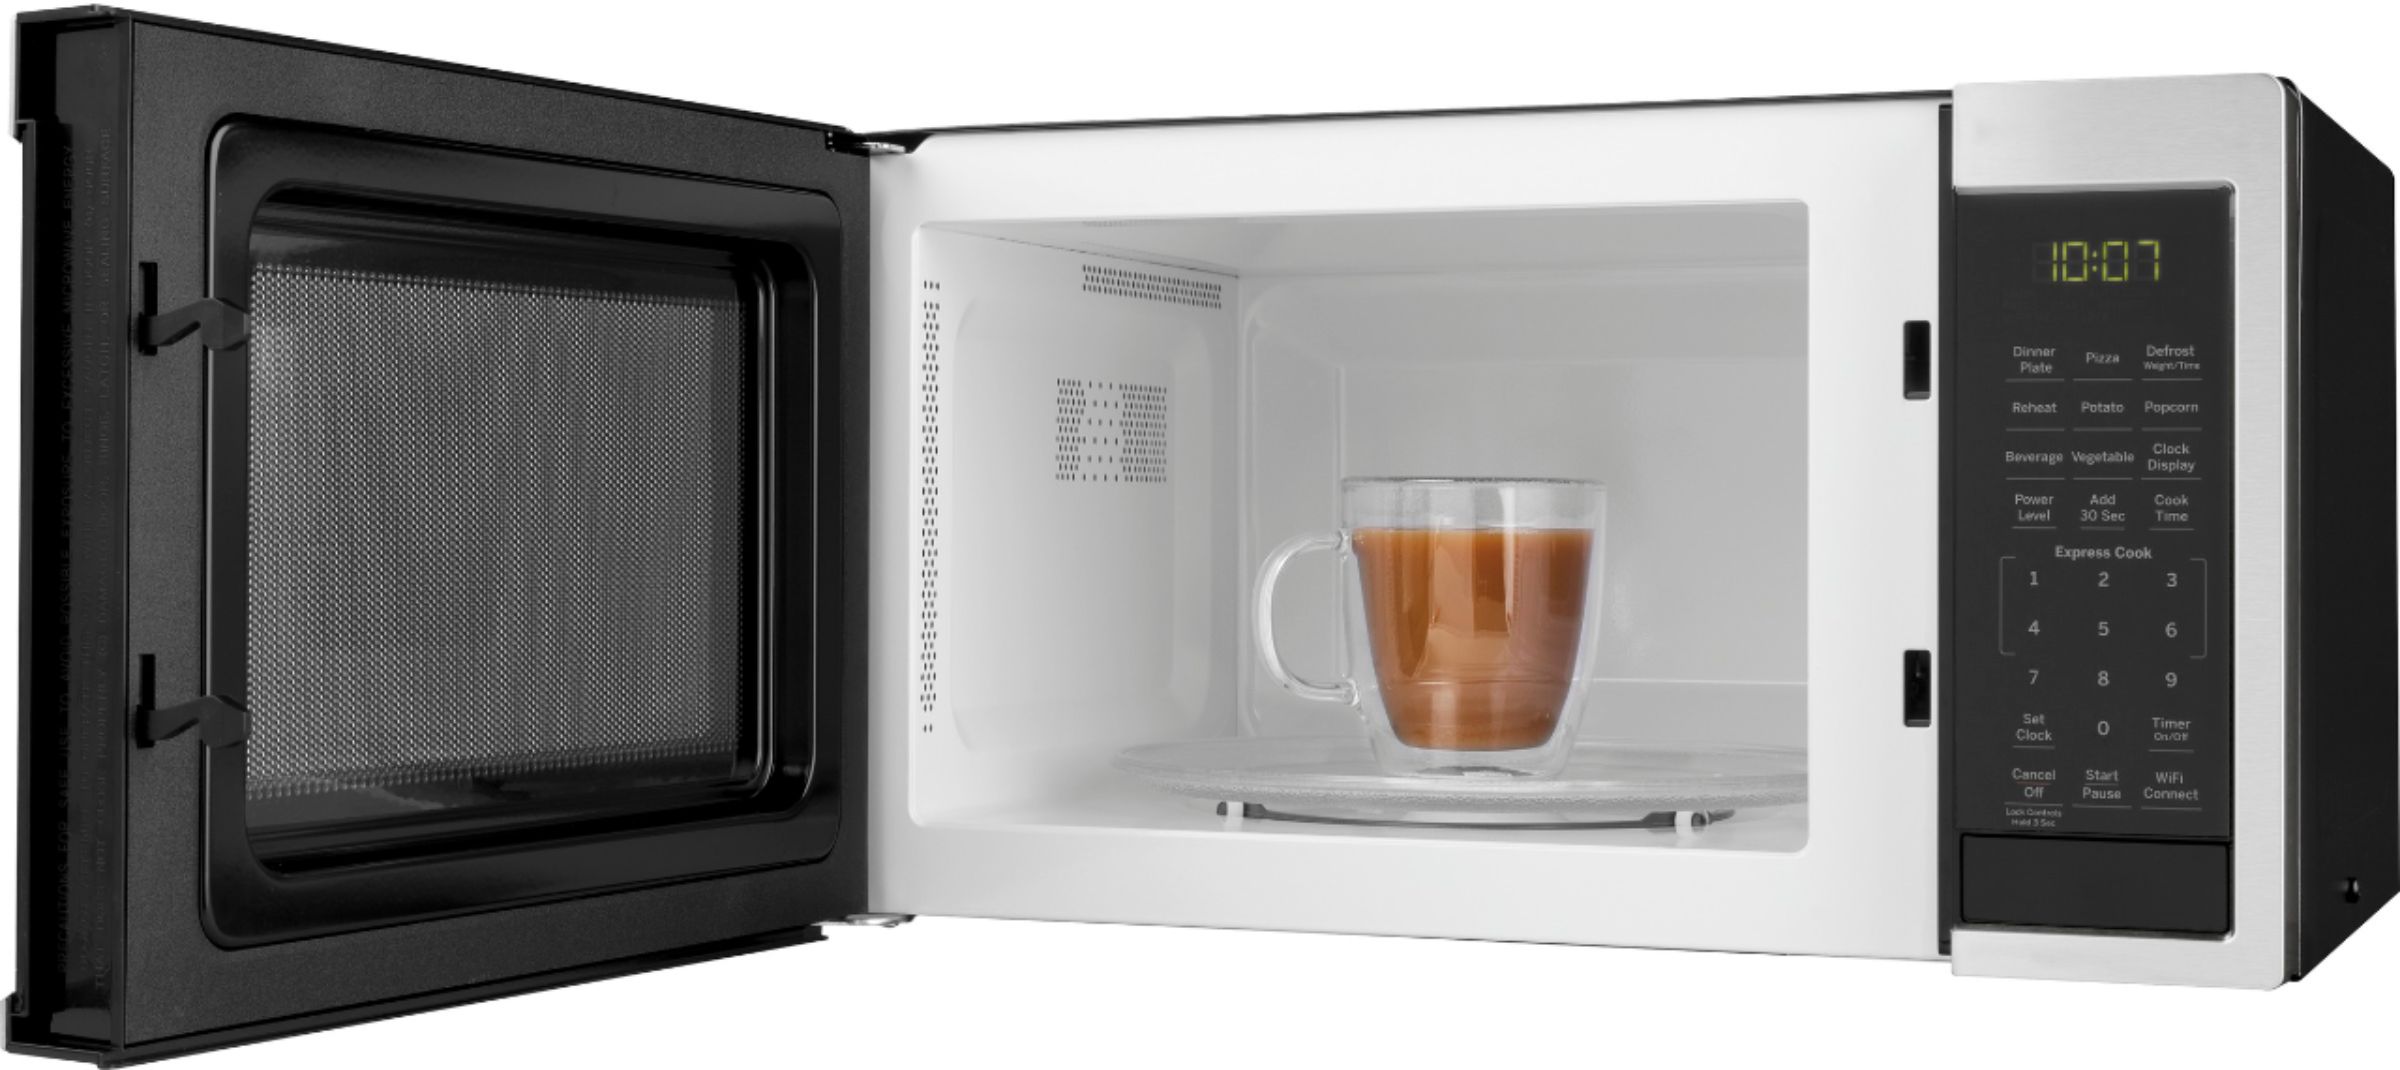 GE Smart Countertop Microwave Oven with Scan-to-Cook Technology review:  GE's smart microwave works well with Alexa, but scan-to-cook is underheated  - CNET